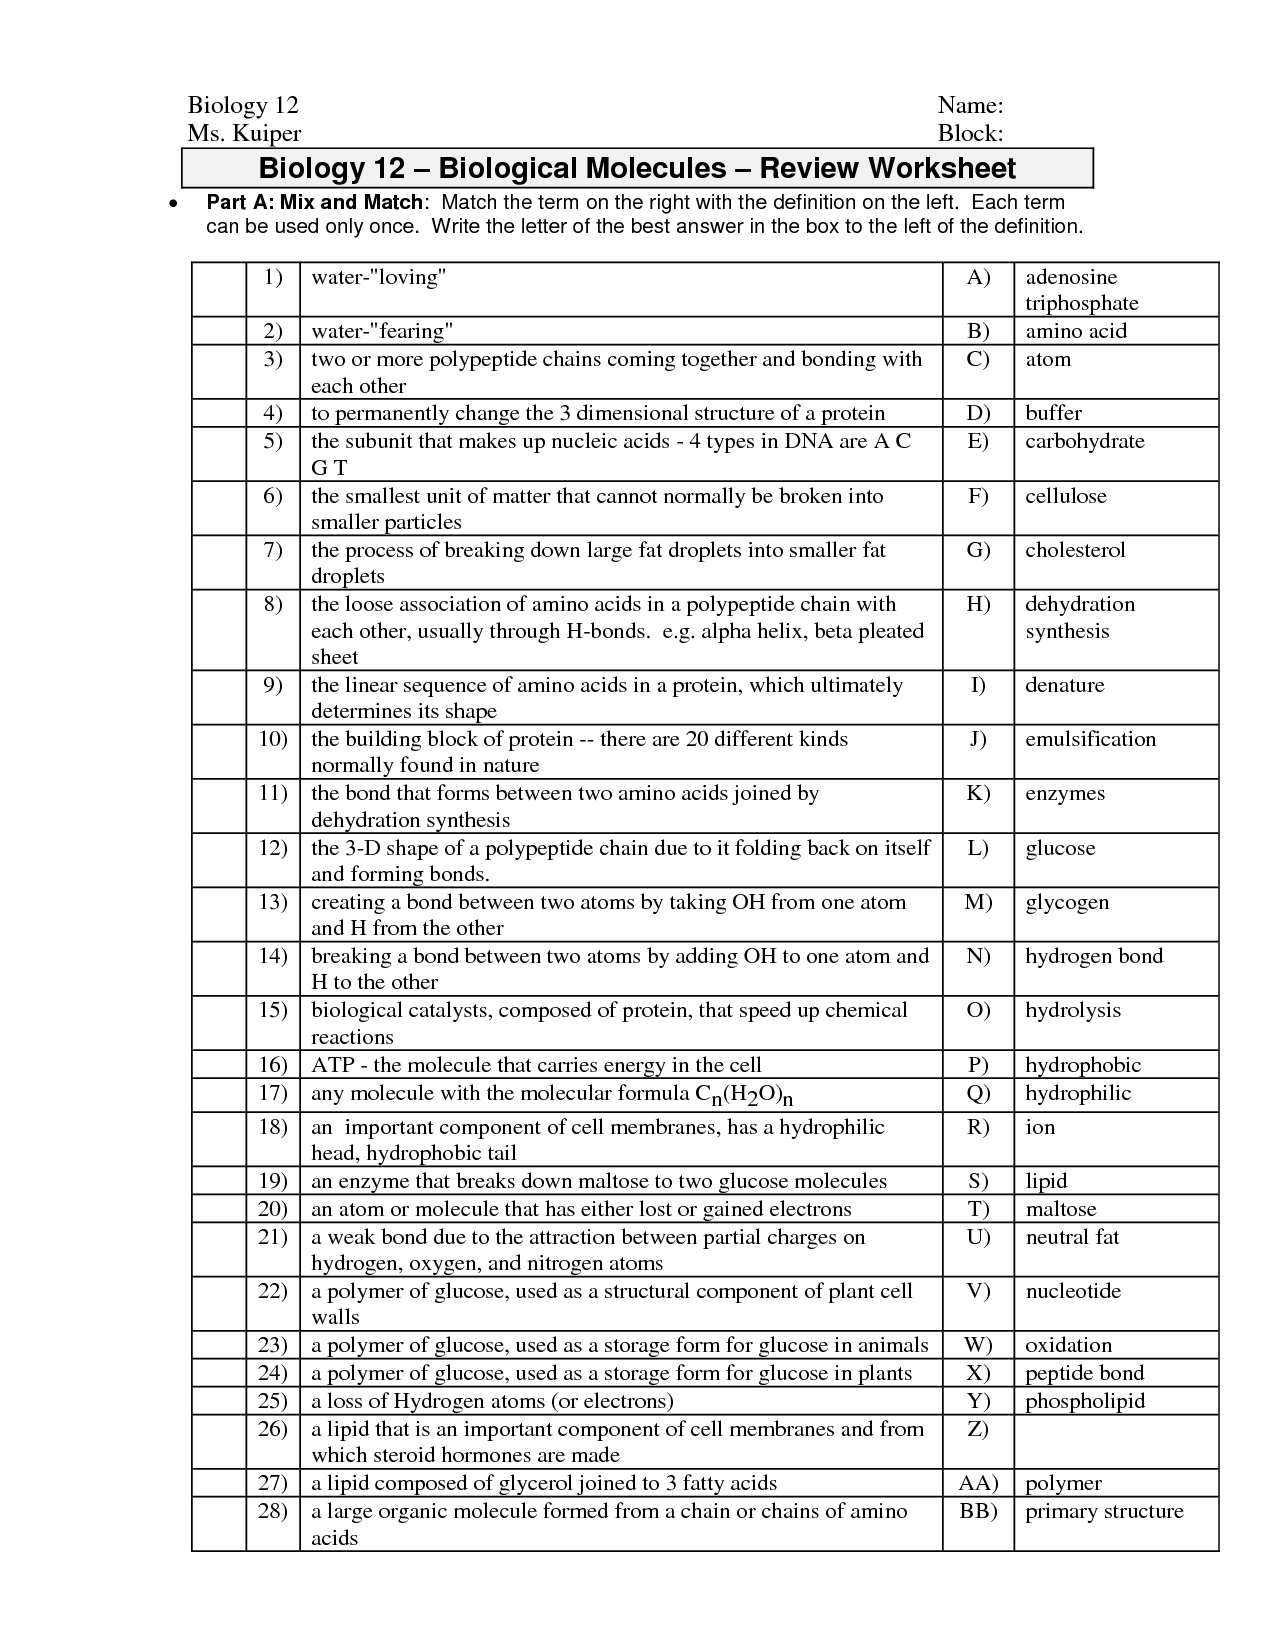 14 Best Images of Biological Molecules Worksheet Answers  Organic Molecules Worksheet Review 